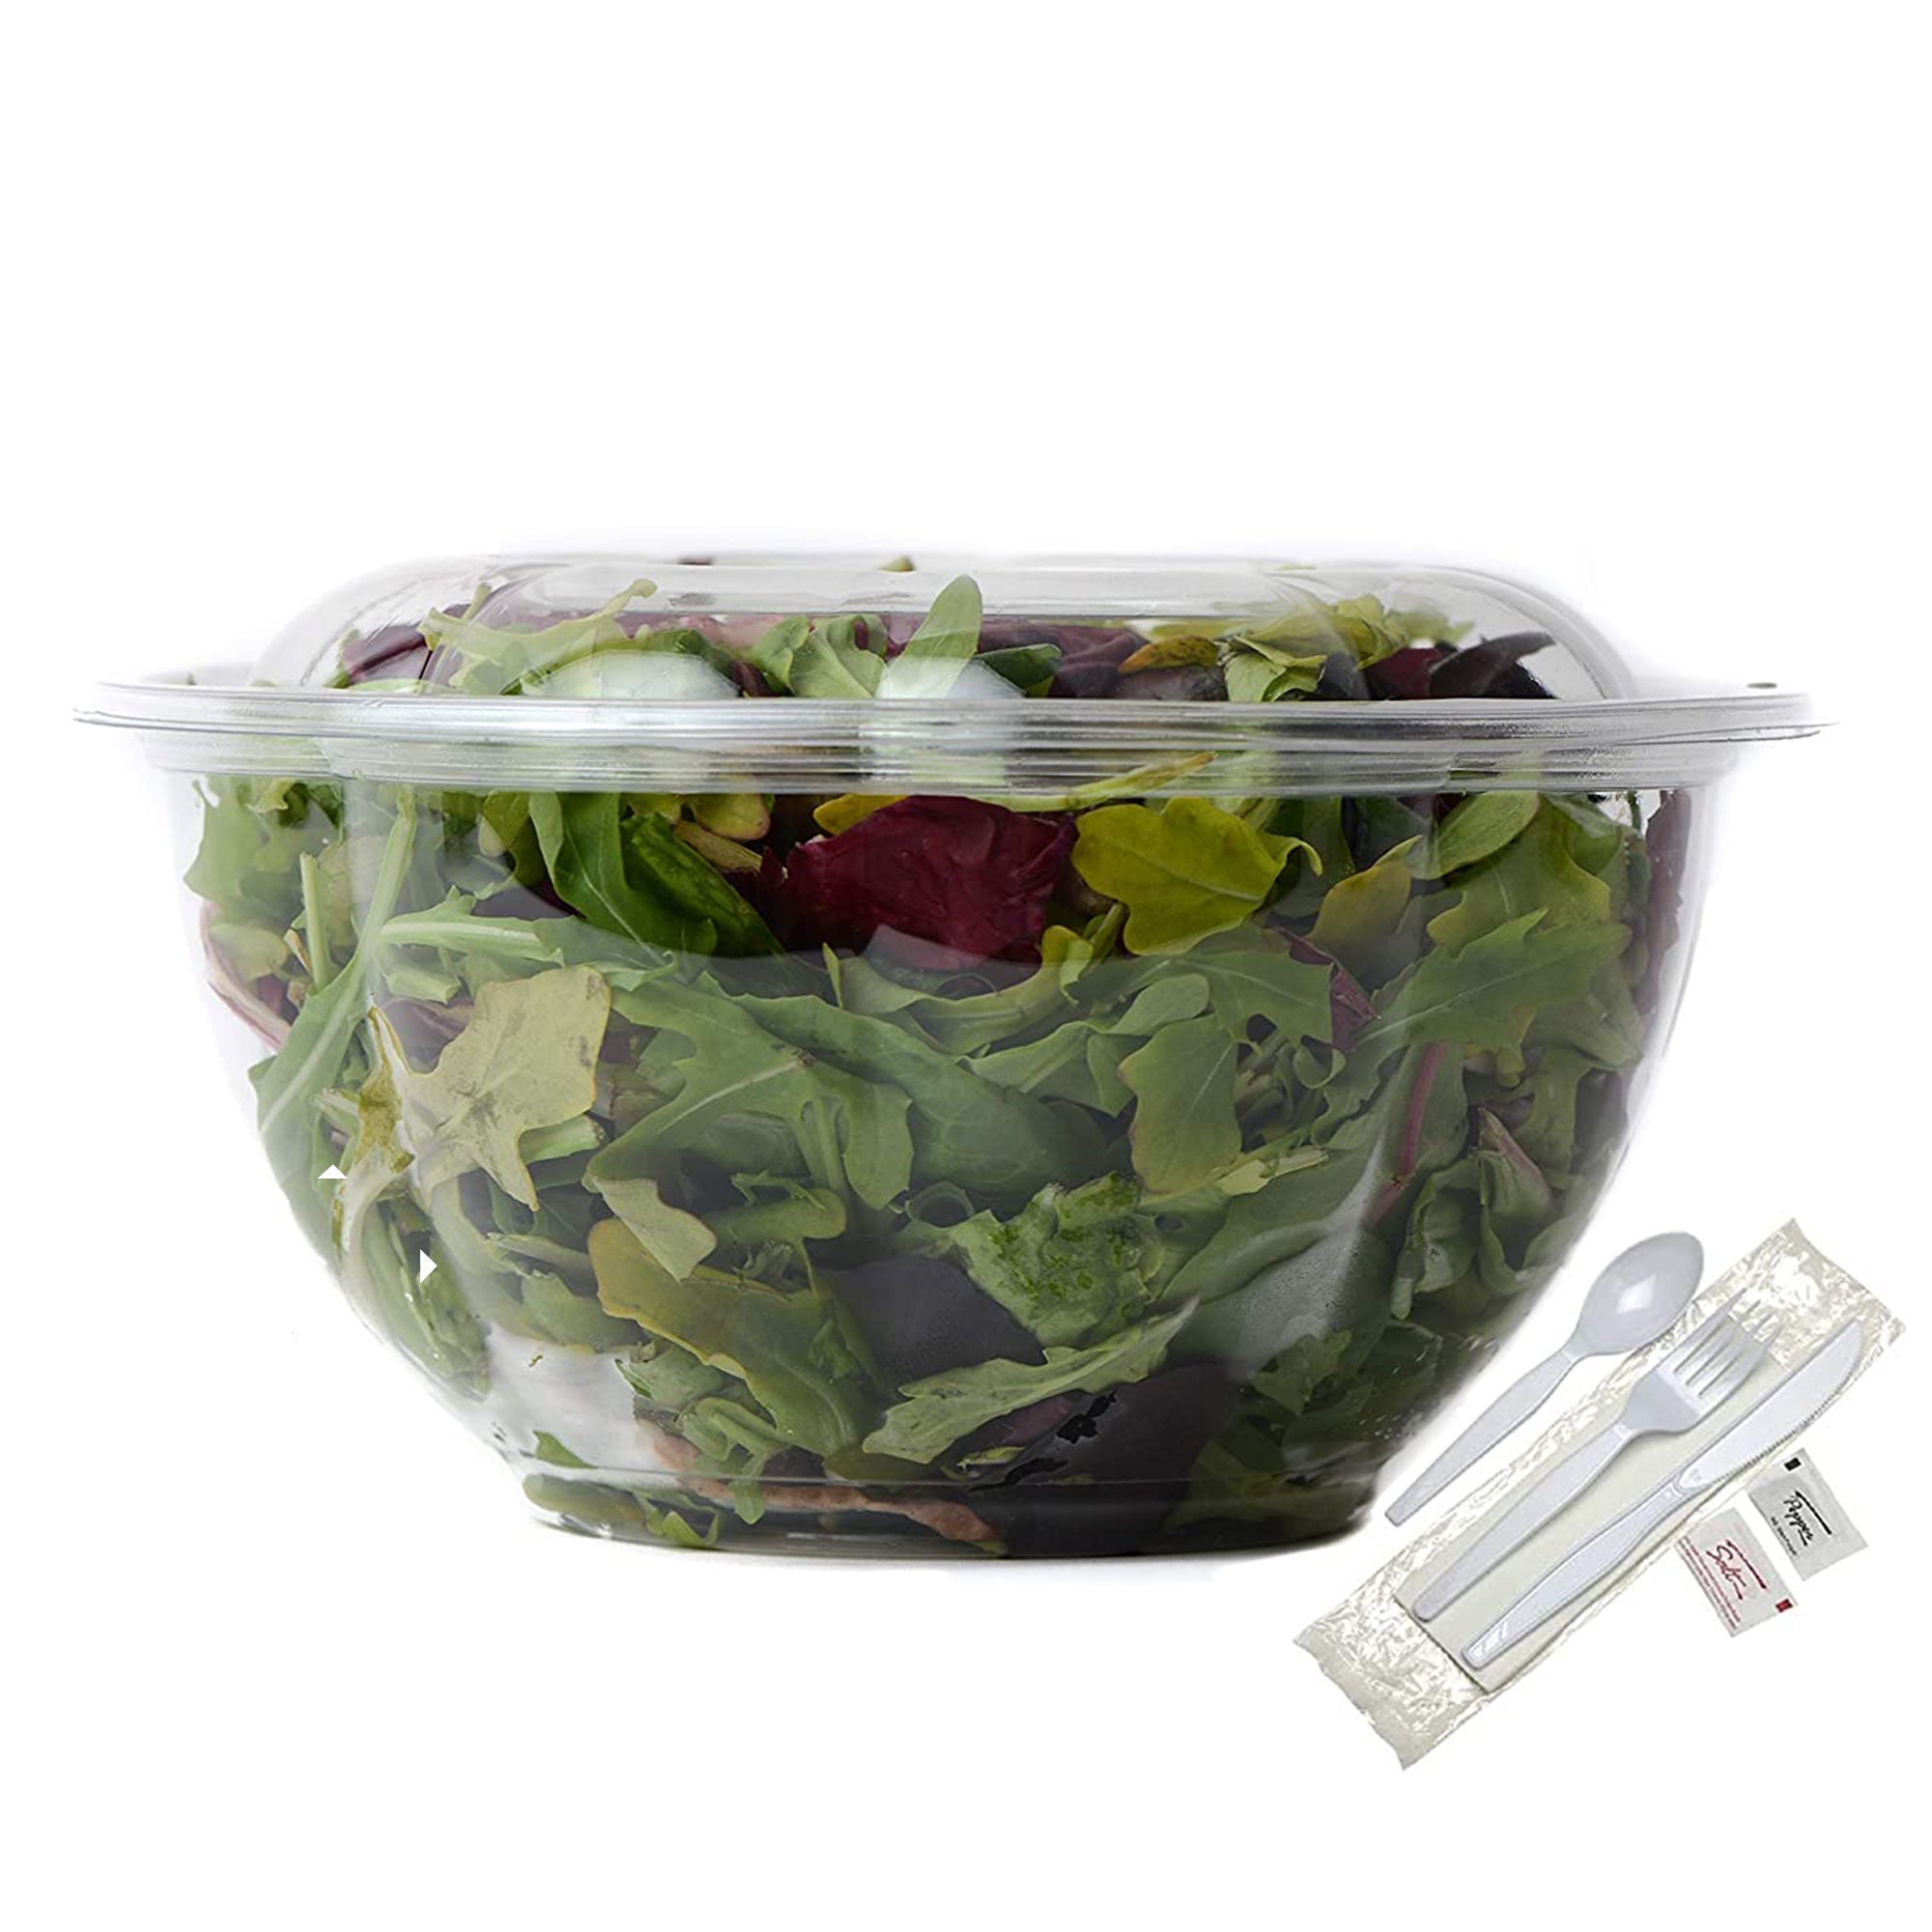 50 Pack Salad Container for Lunch - 18 oz Clear Plastic Bowls - Round Disposable Salad Bowls with Lids - Airtight Leak Resistant Meal Prep Bowls 